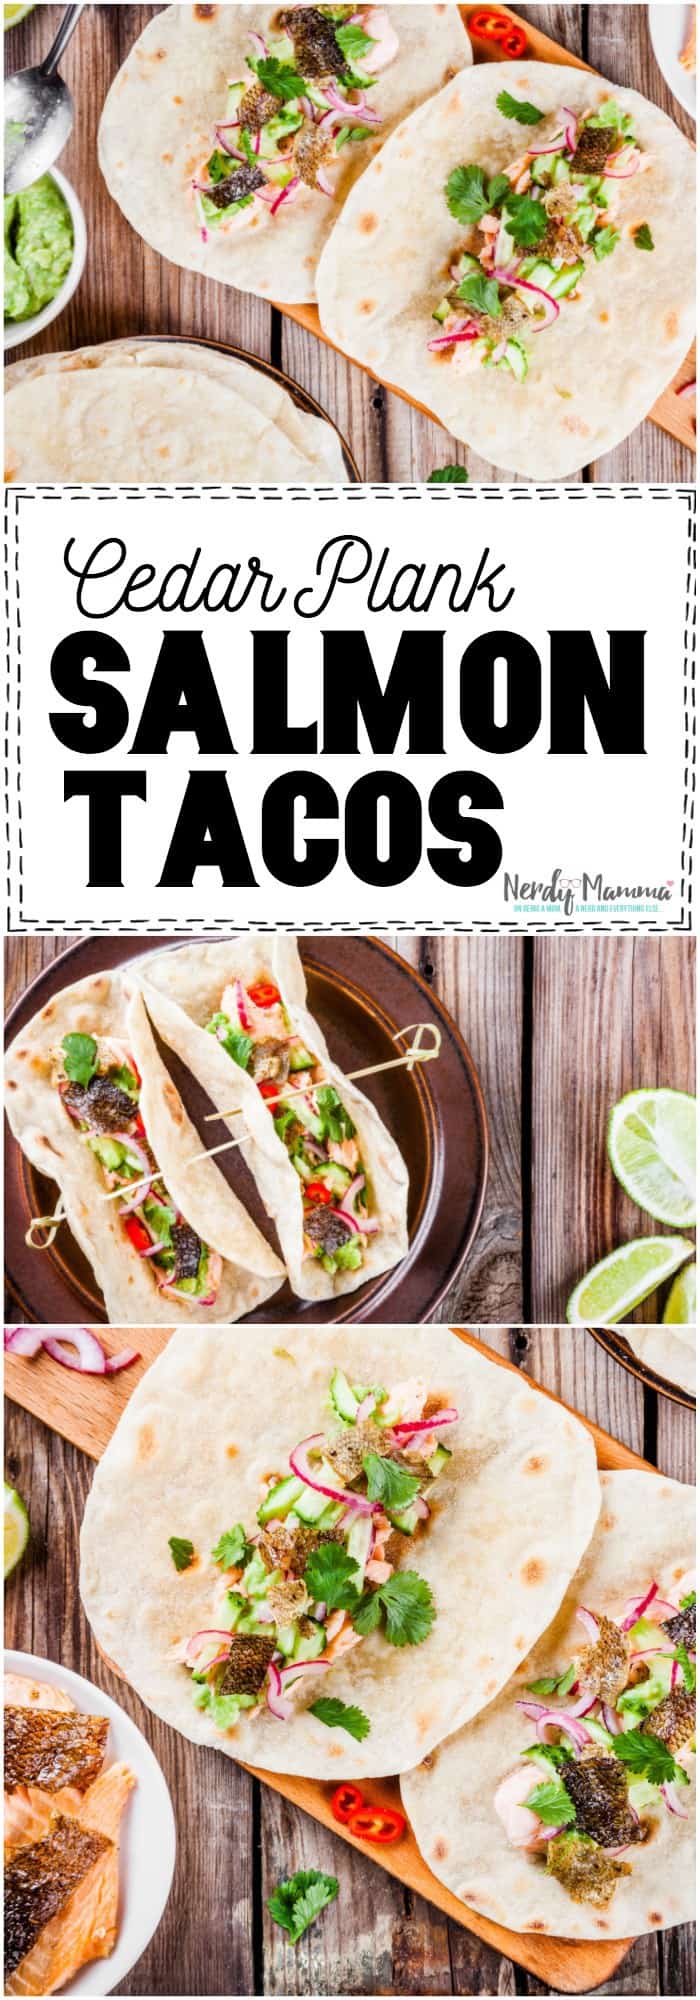 Oh, this recipe for Cedar Plank Salmon Tacos sounds so easy. I can't wait to try it! #recipe #salmon #grill #grilling #recipe #taco #mexican #texmex